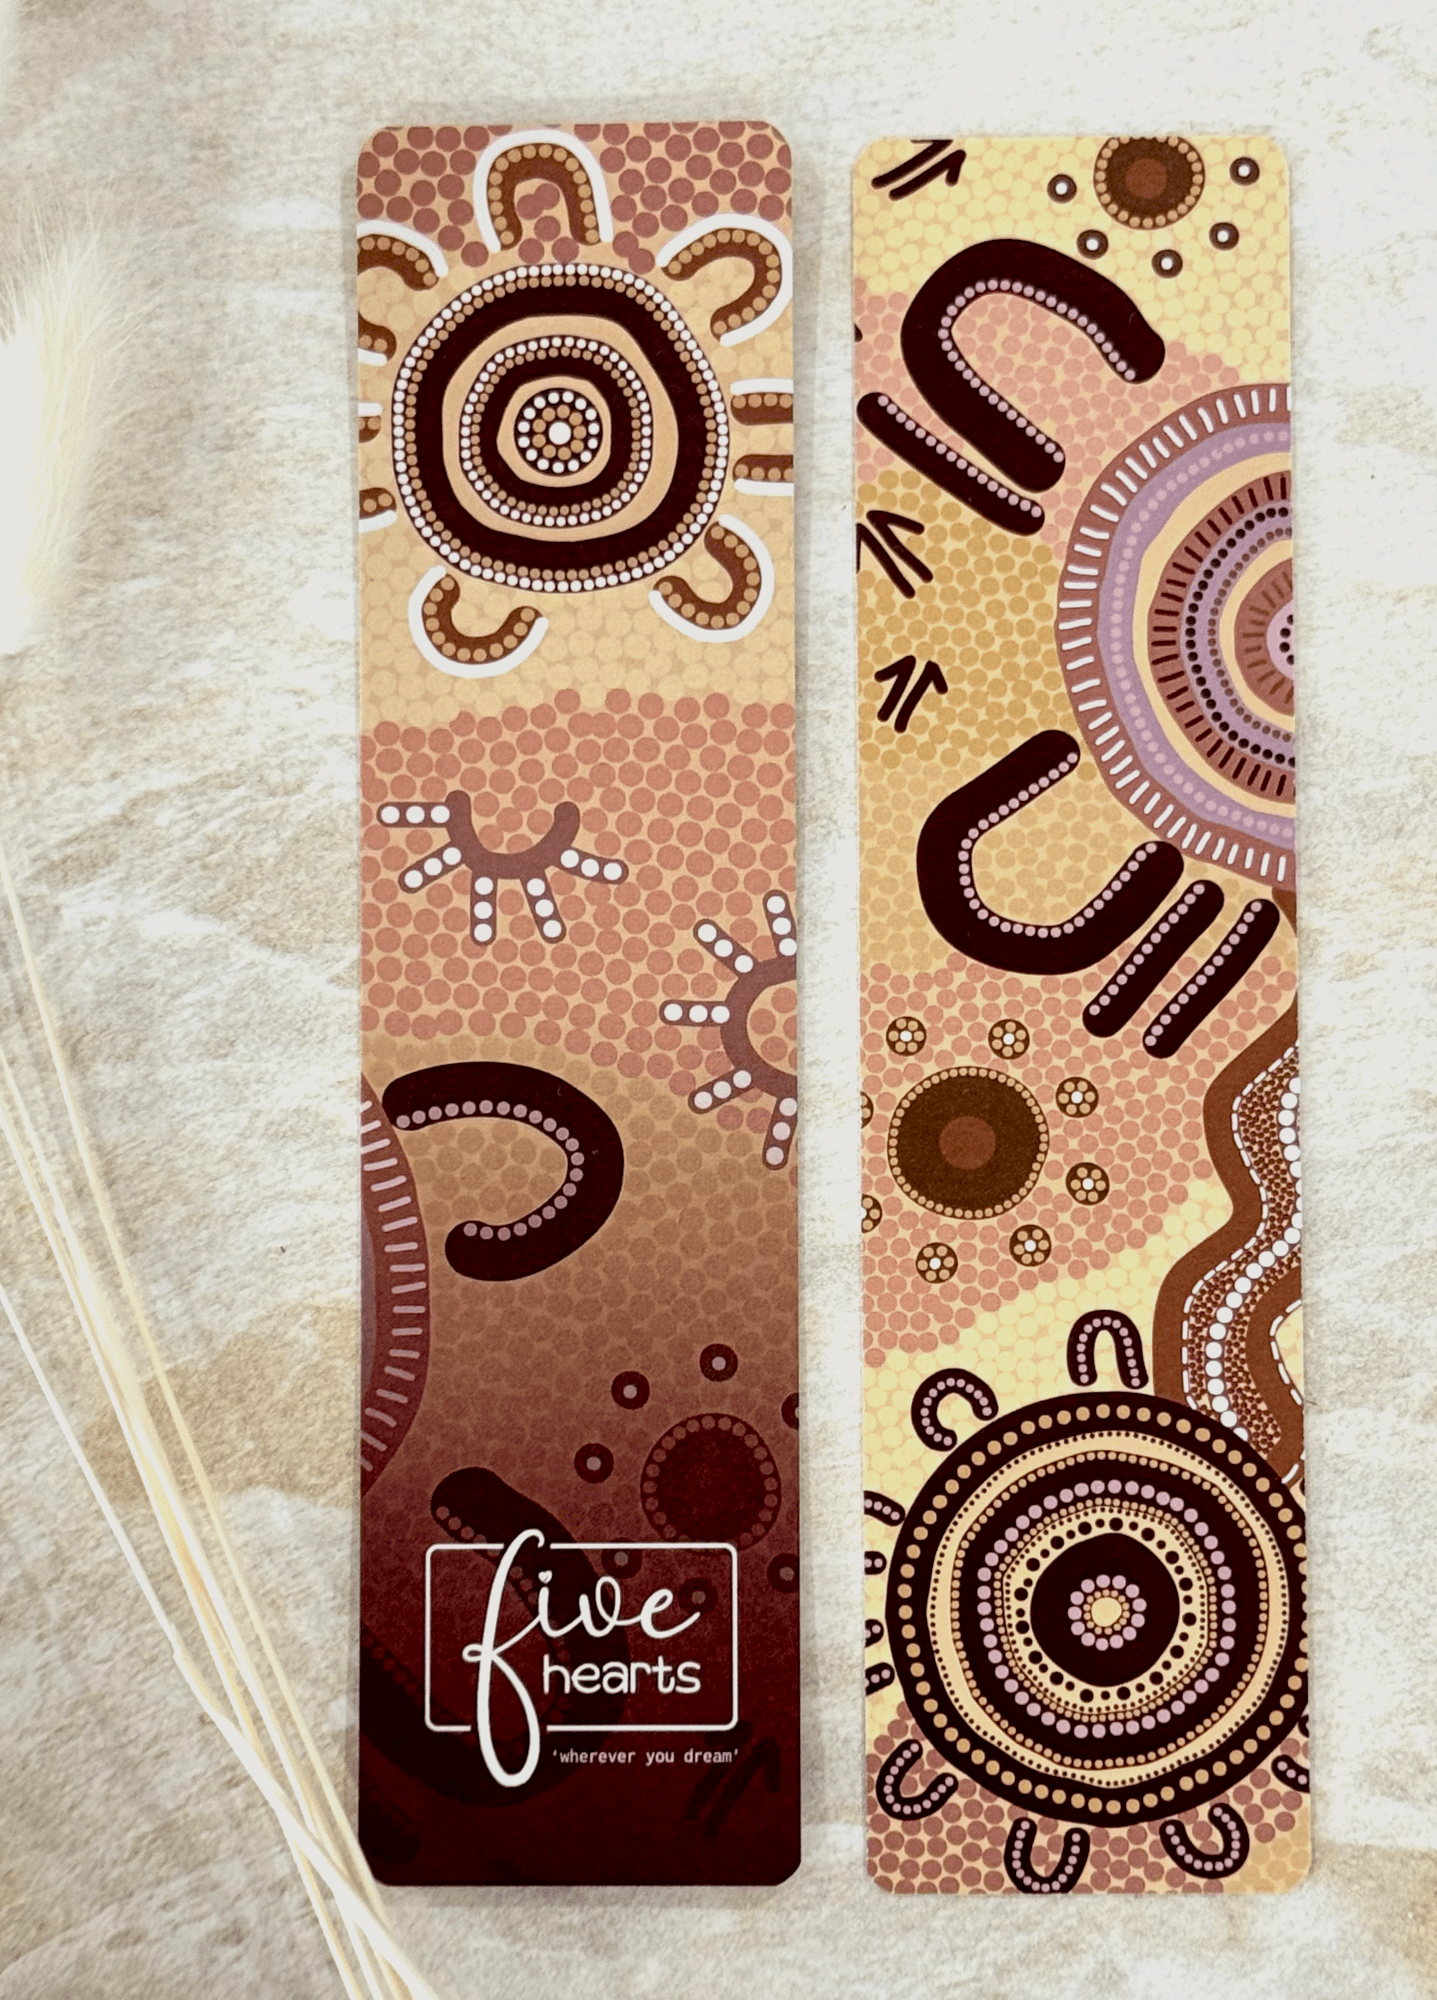 Coming Home bookmark 100% recycled paper. Aboriginal art